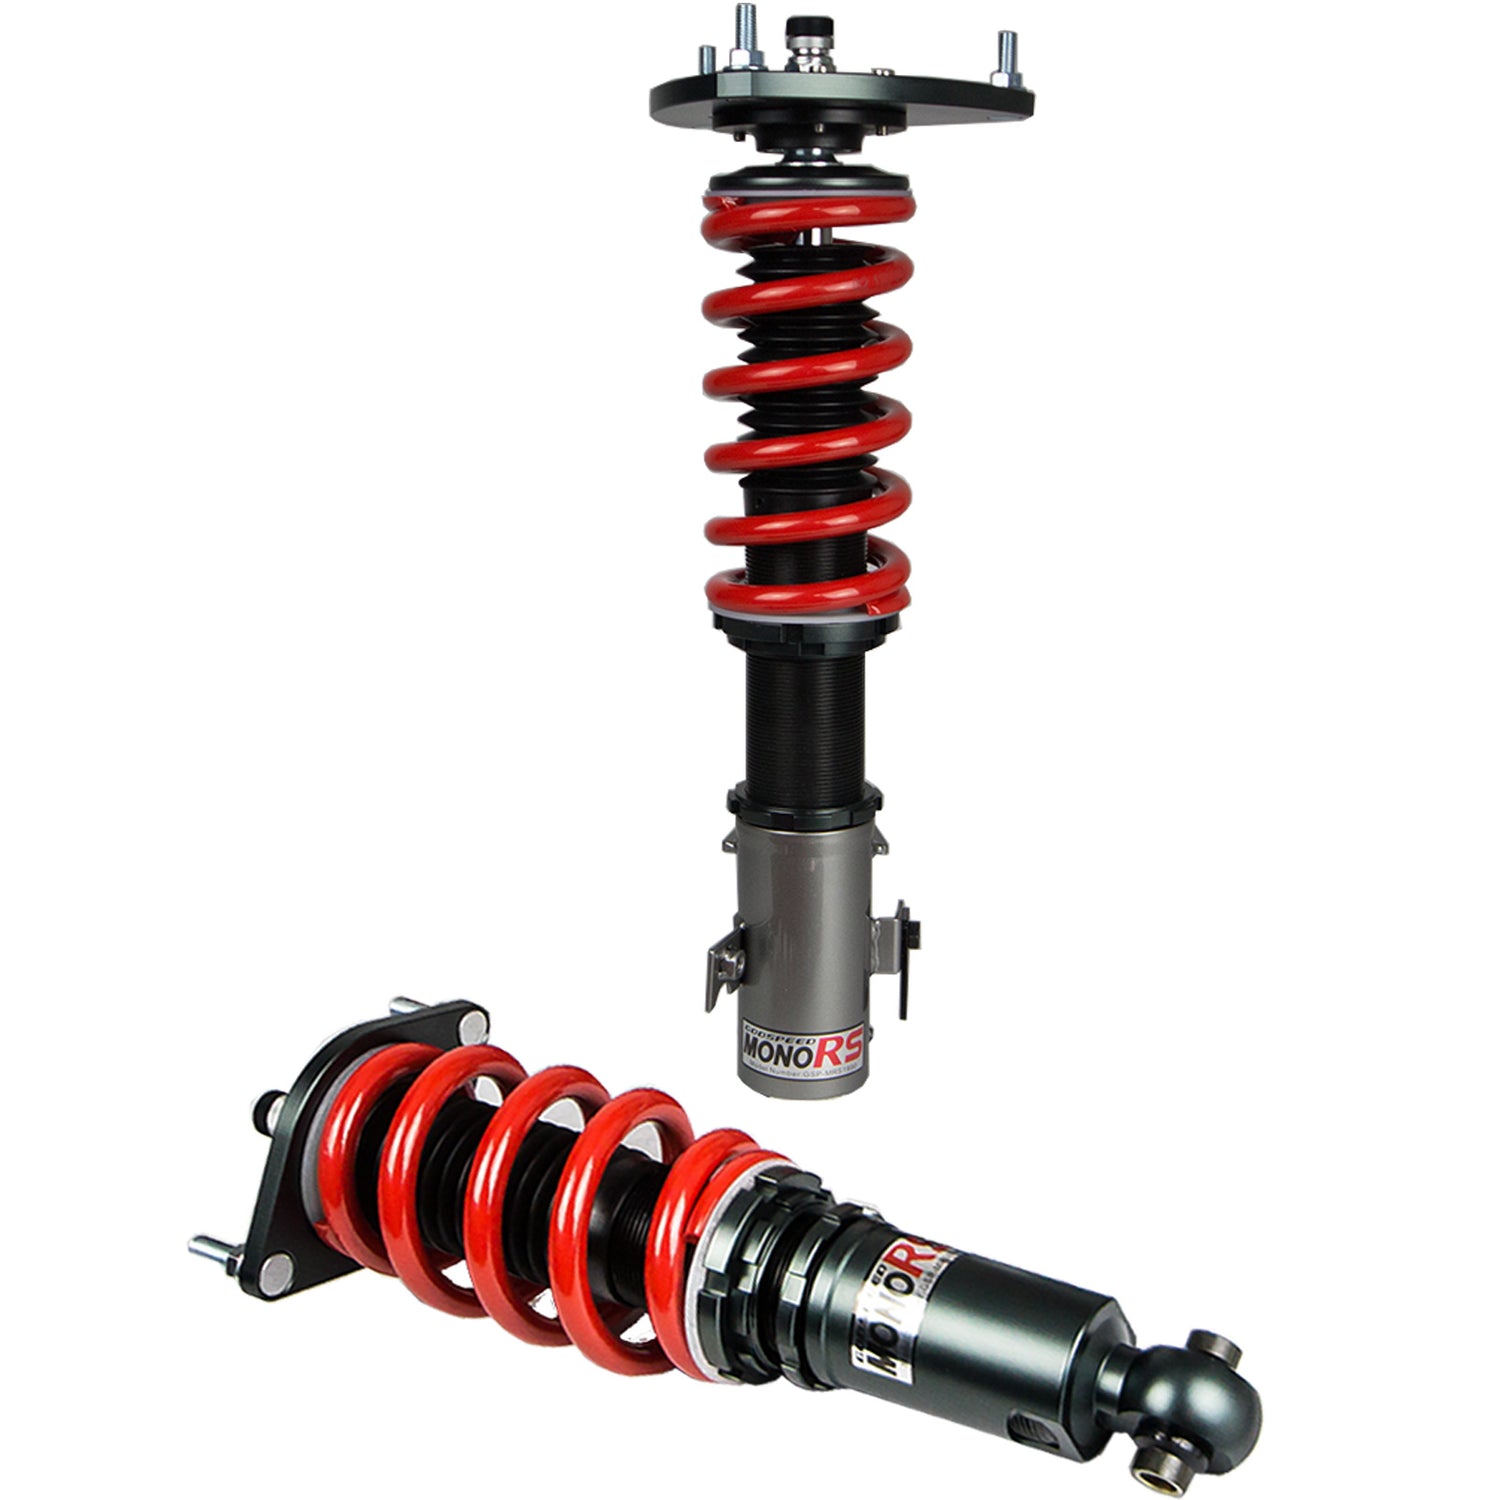 Godspeed MRS1990-A MonoRS Coilover Lowering Kit, 32 Damping Adjustment, Ride Height Adjustable